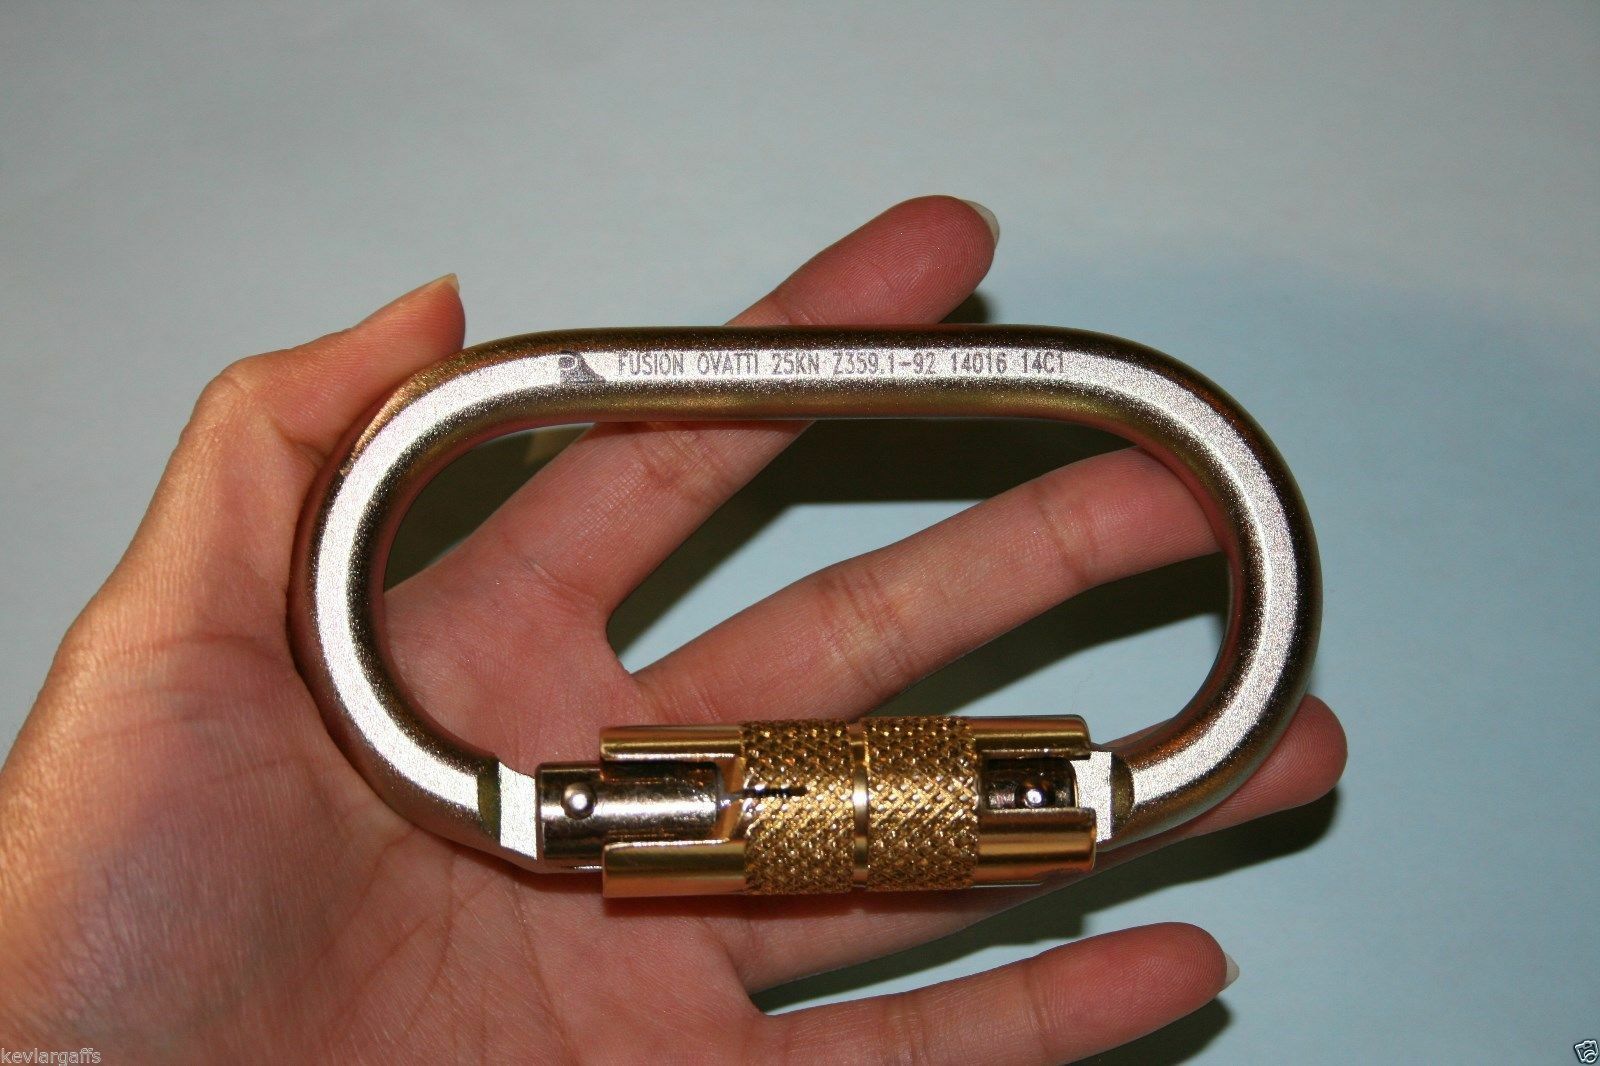 Gold Color Carabiner Steel Auto Locking Oval Shape 5600lb New Free Shipping